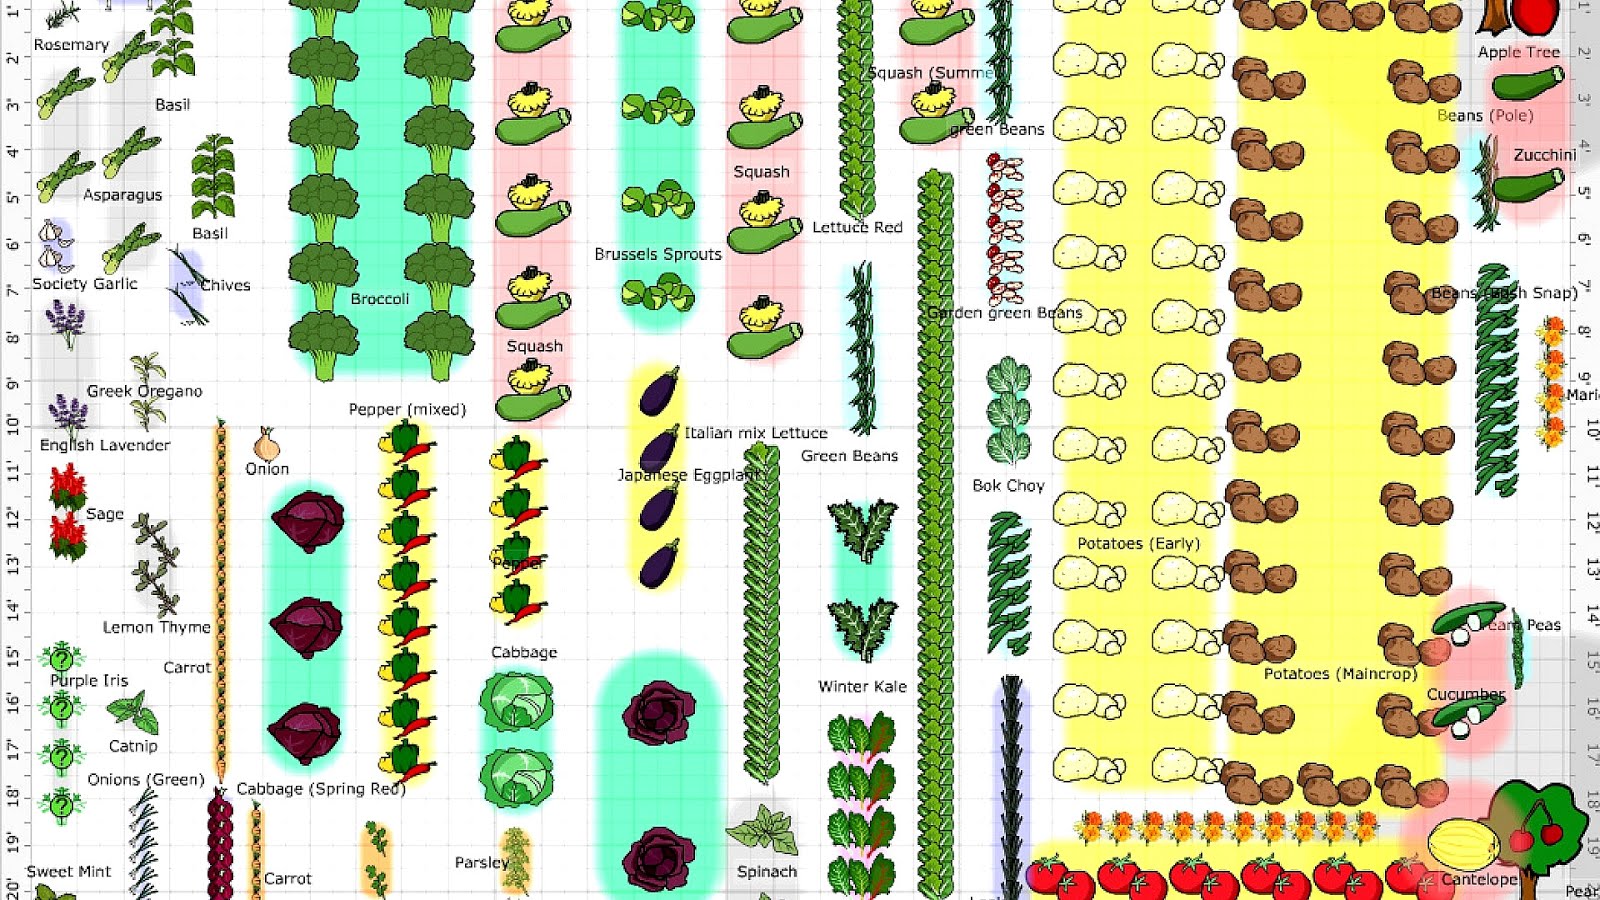 How To Layout A Vegetable Garden - Vege Choices